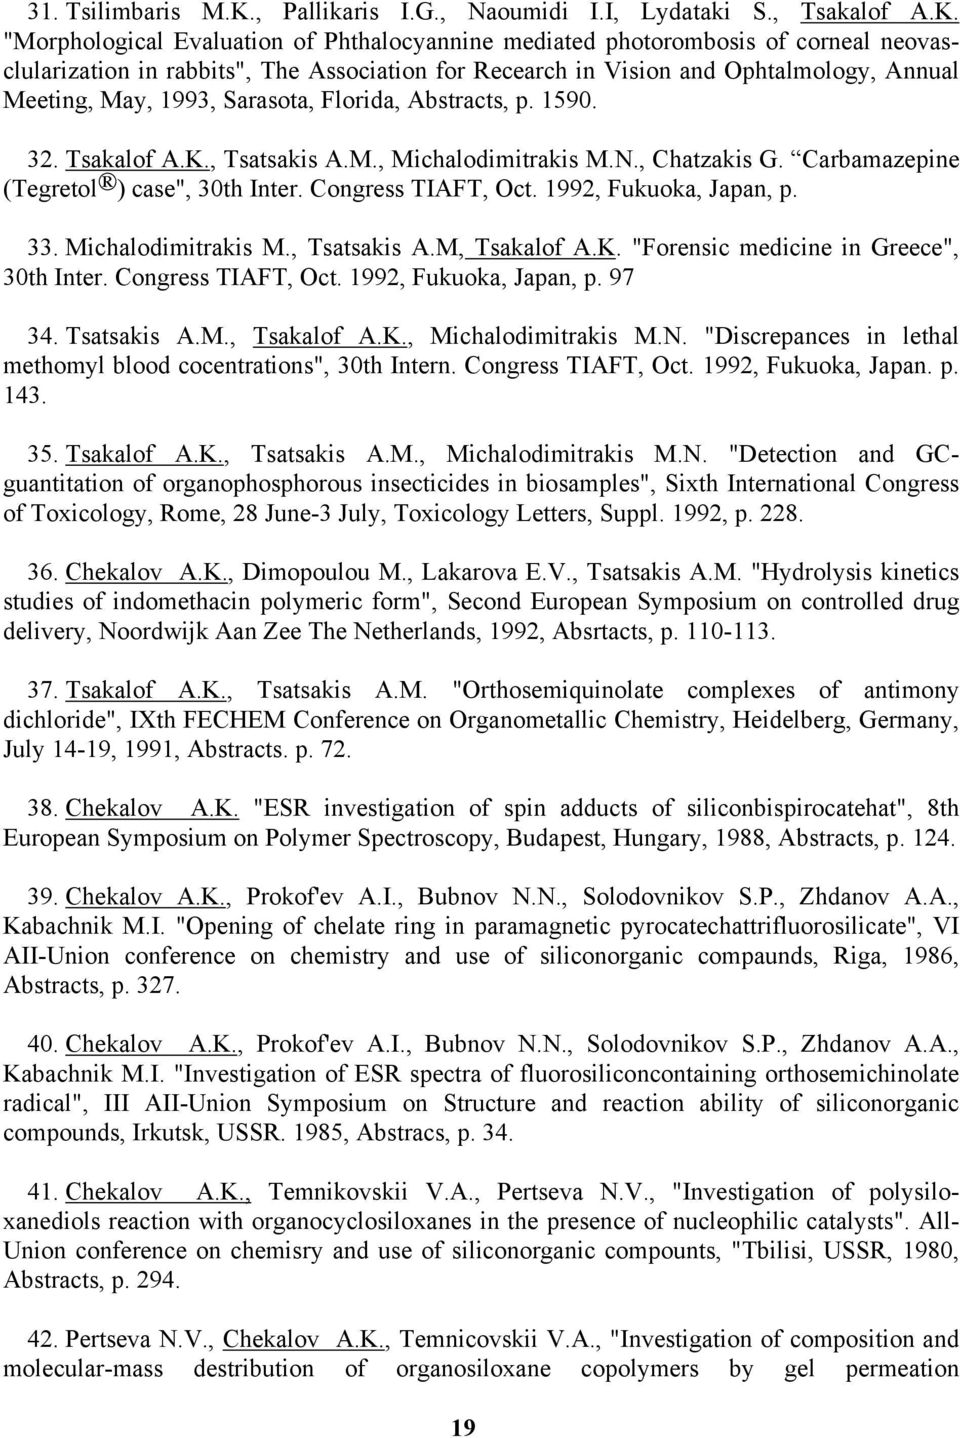 "Morphological Evaluation of Phthalocyannine mediated photorombosis of corneal neovasclularization in rabbits", The Association for Recearch in Vision and Ophtalmology, Annual Meeting, May, 1993,